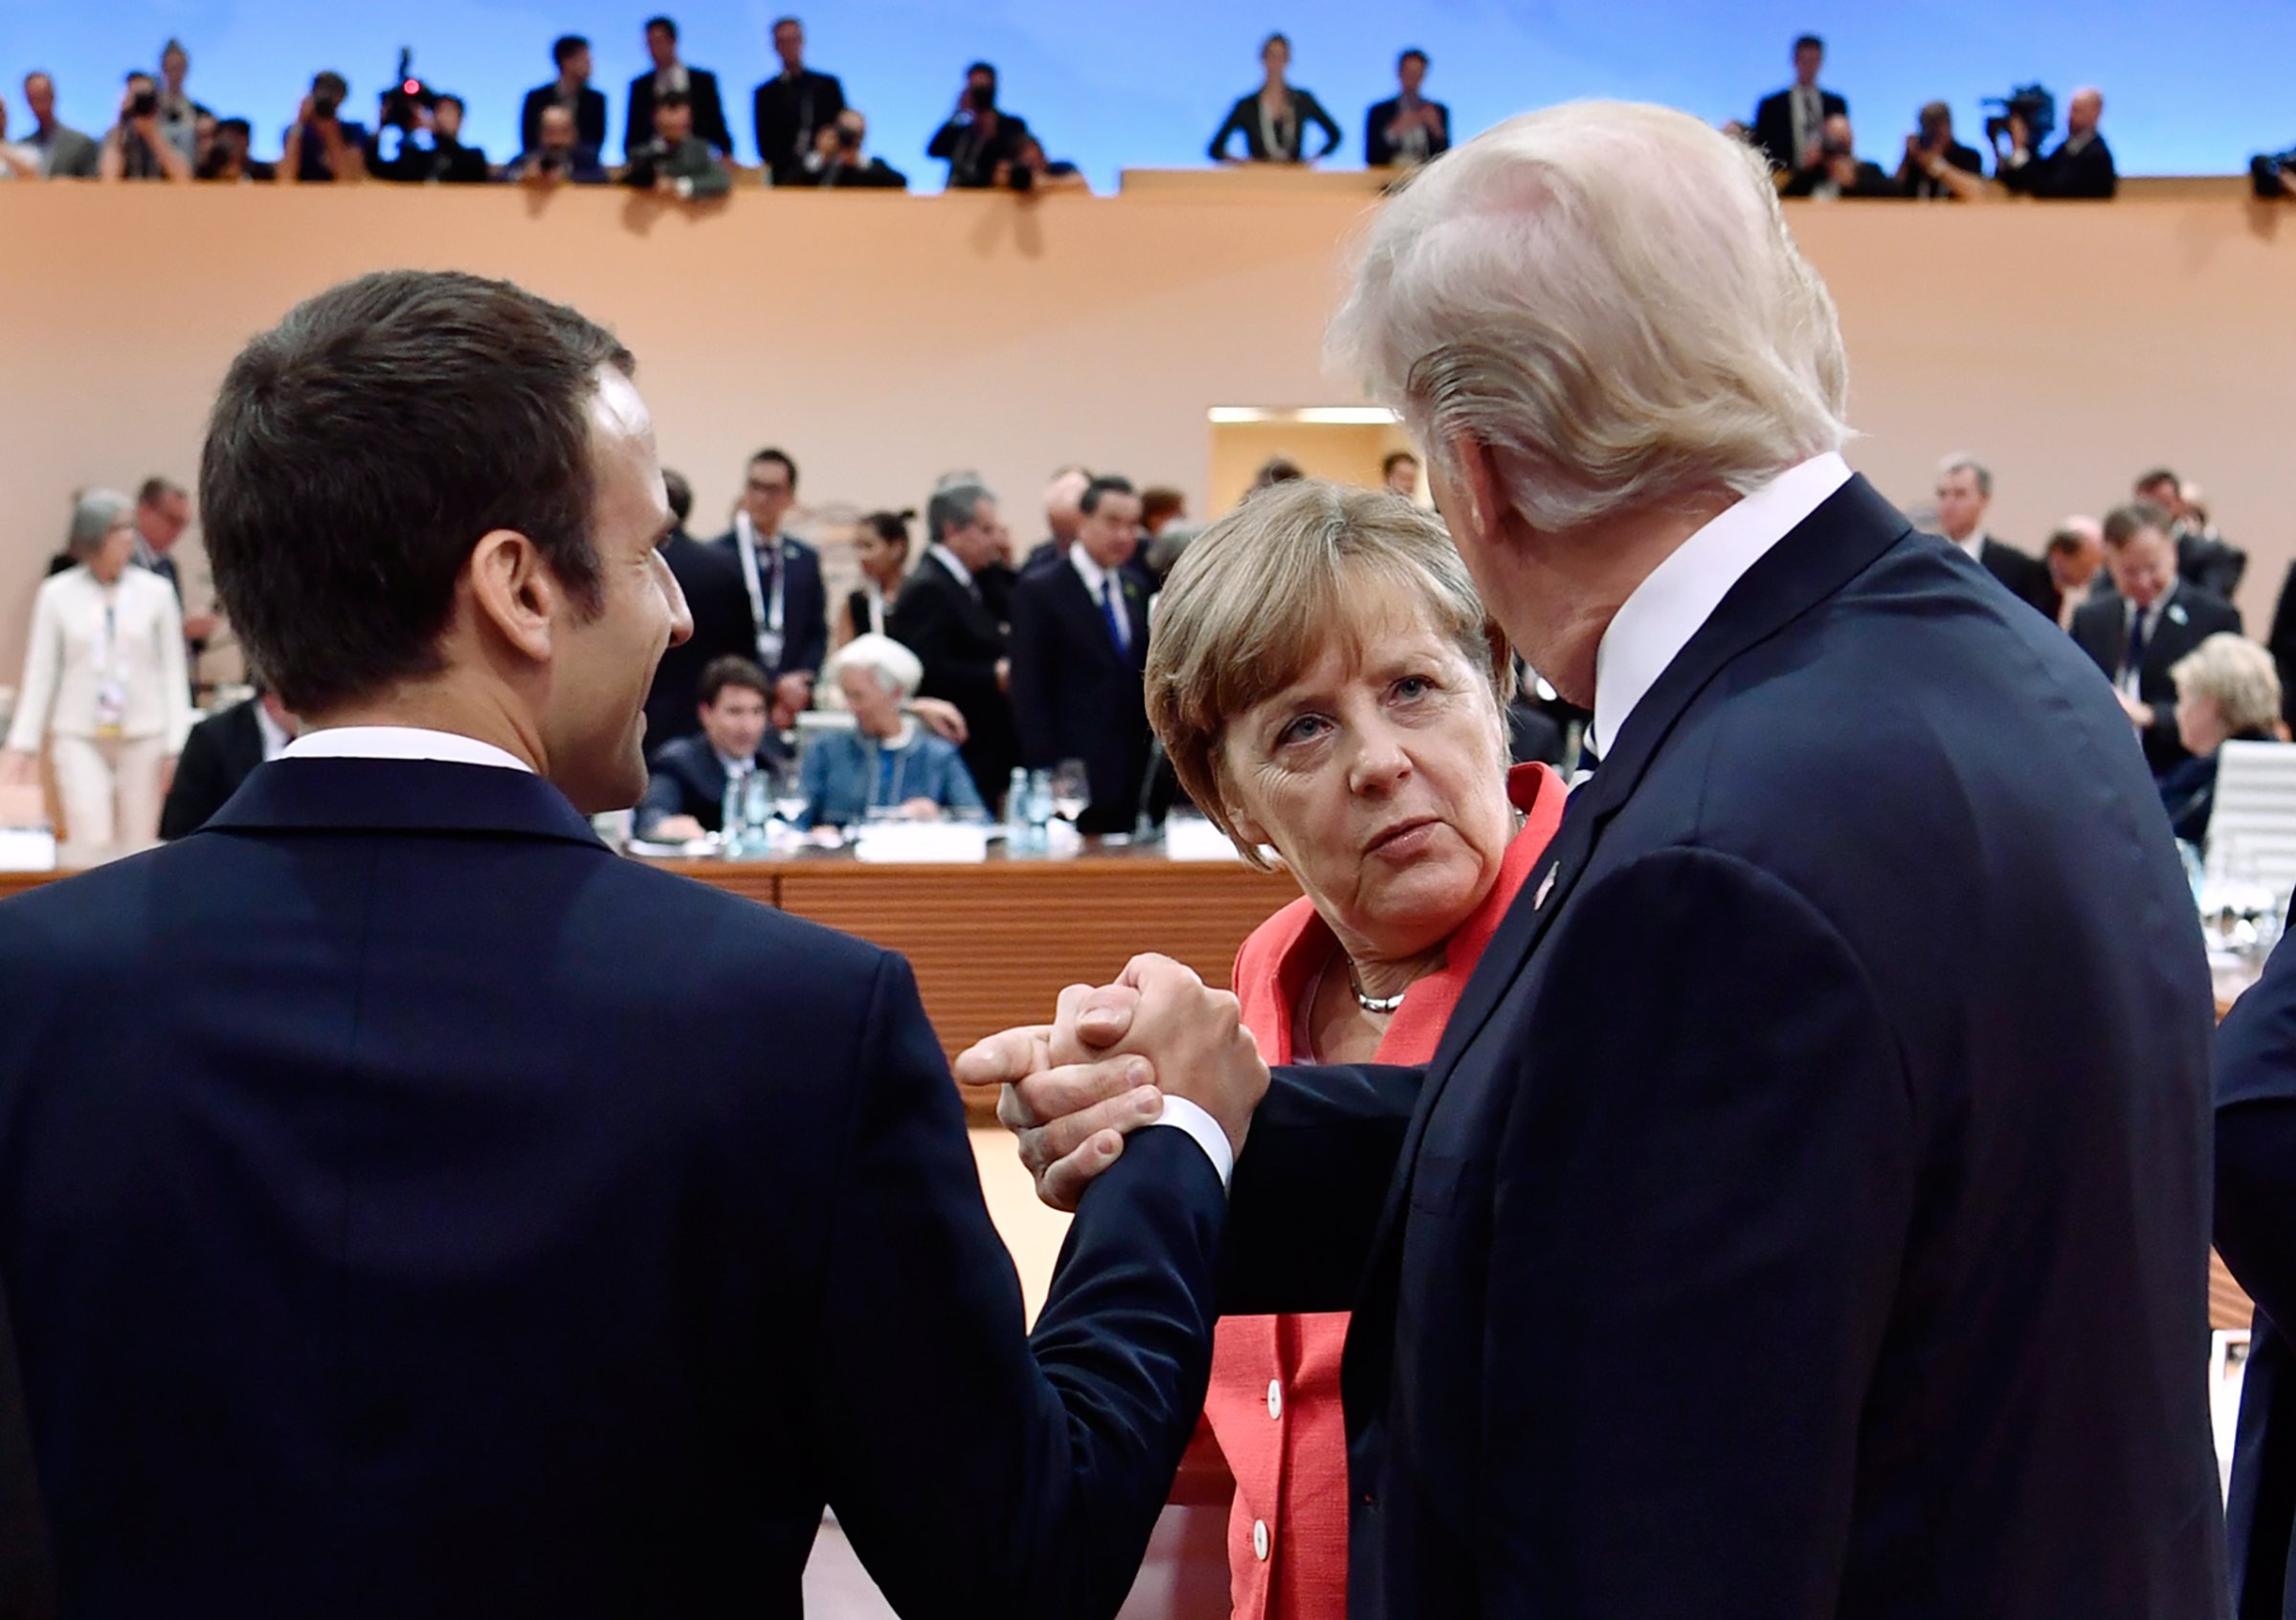 Macron, left, and Trump, right, chat with Merkel in Hamburg on July 7